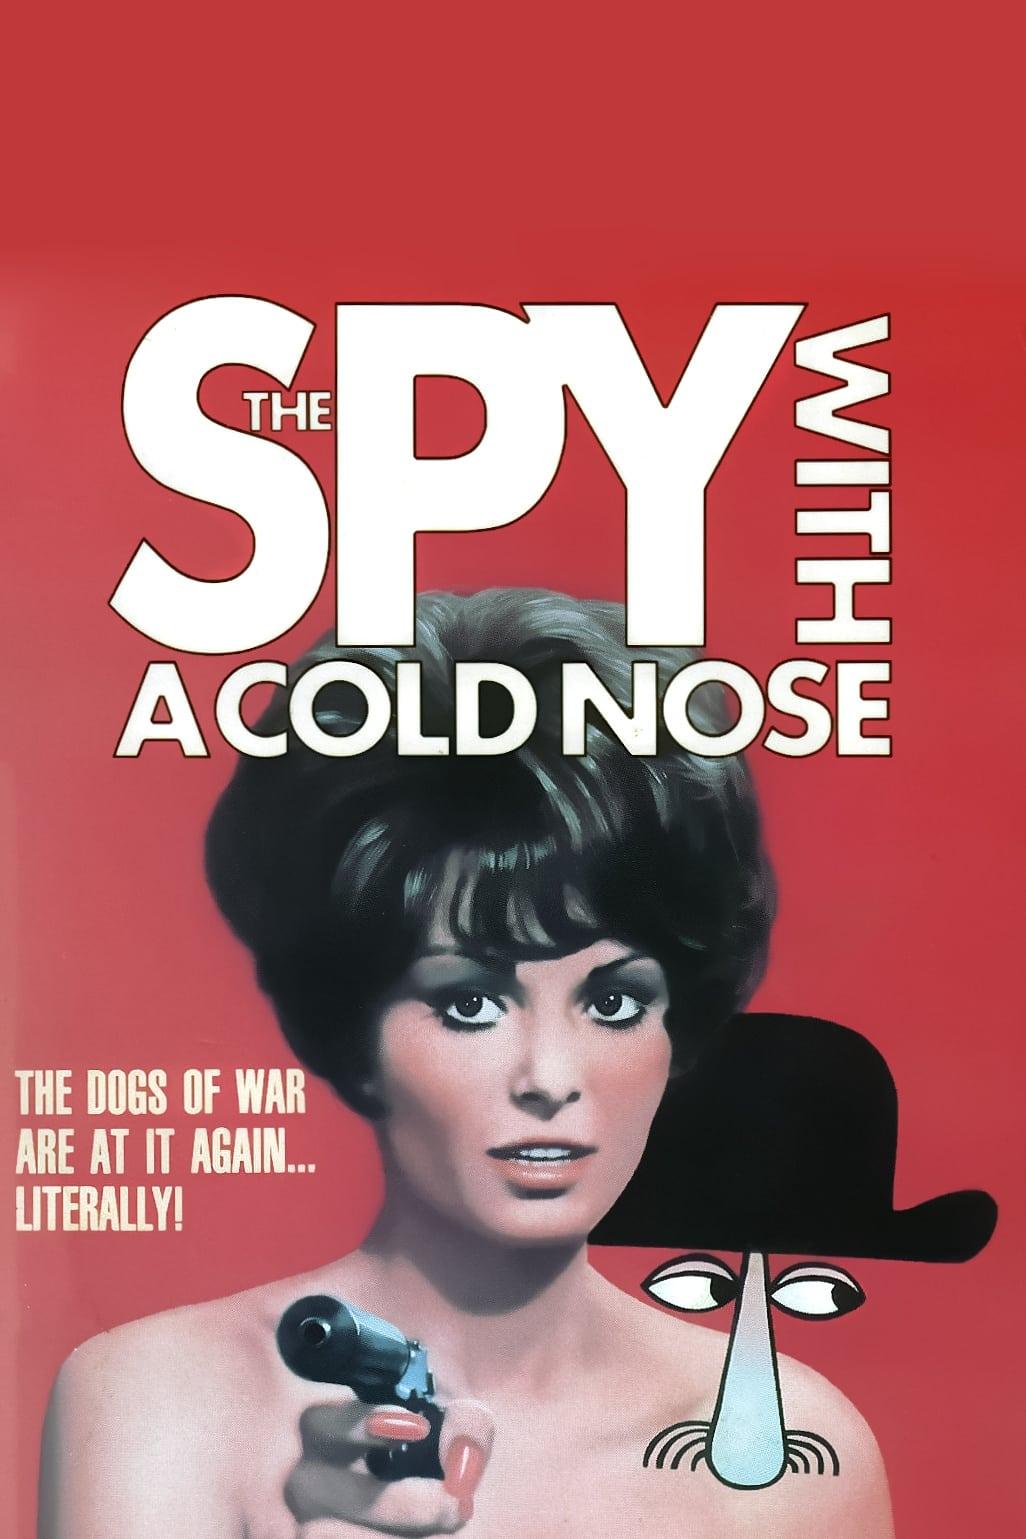 The Spy with a Cold Nose poster